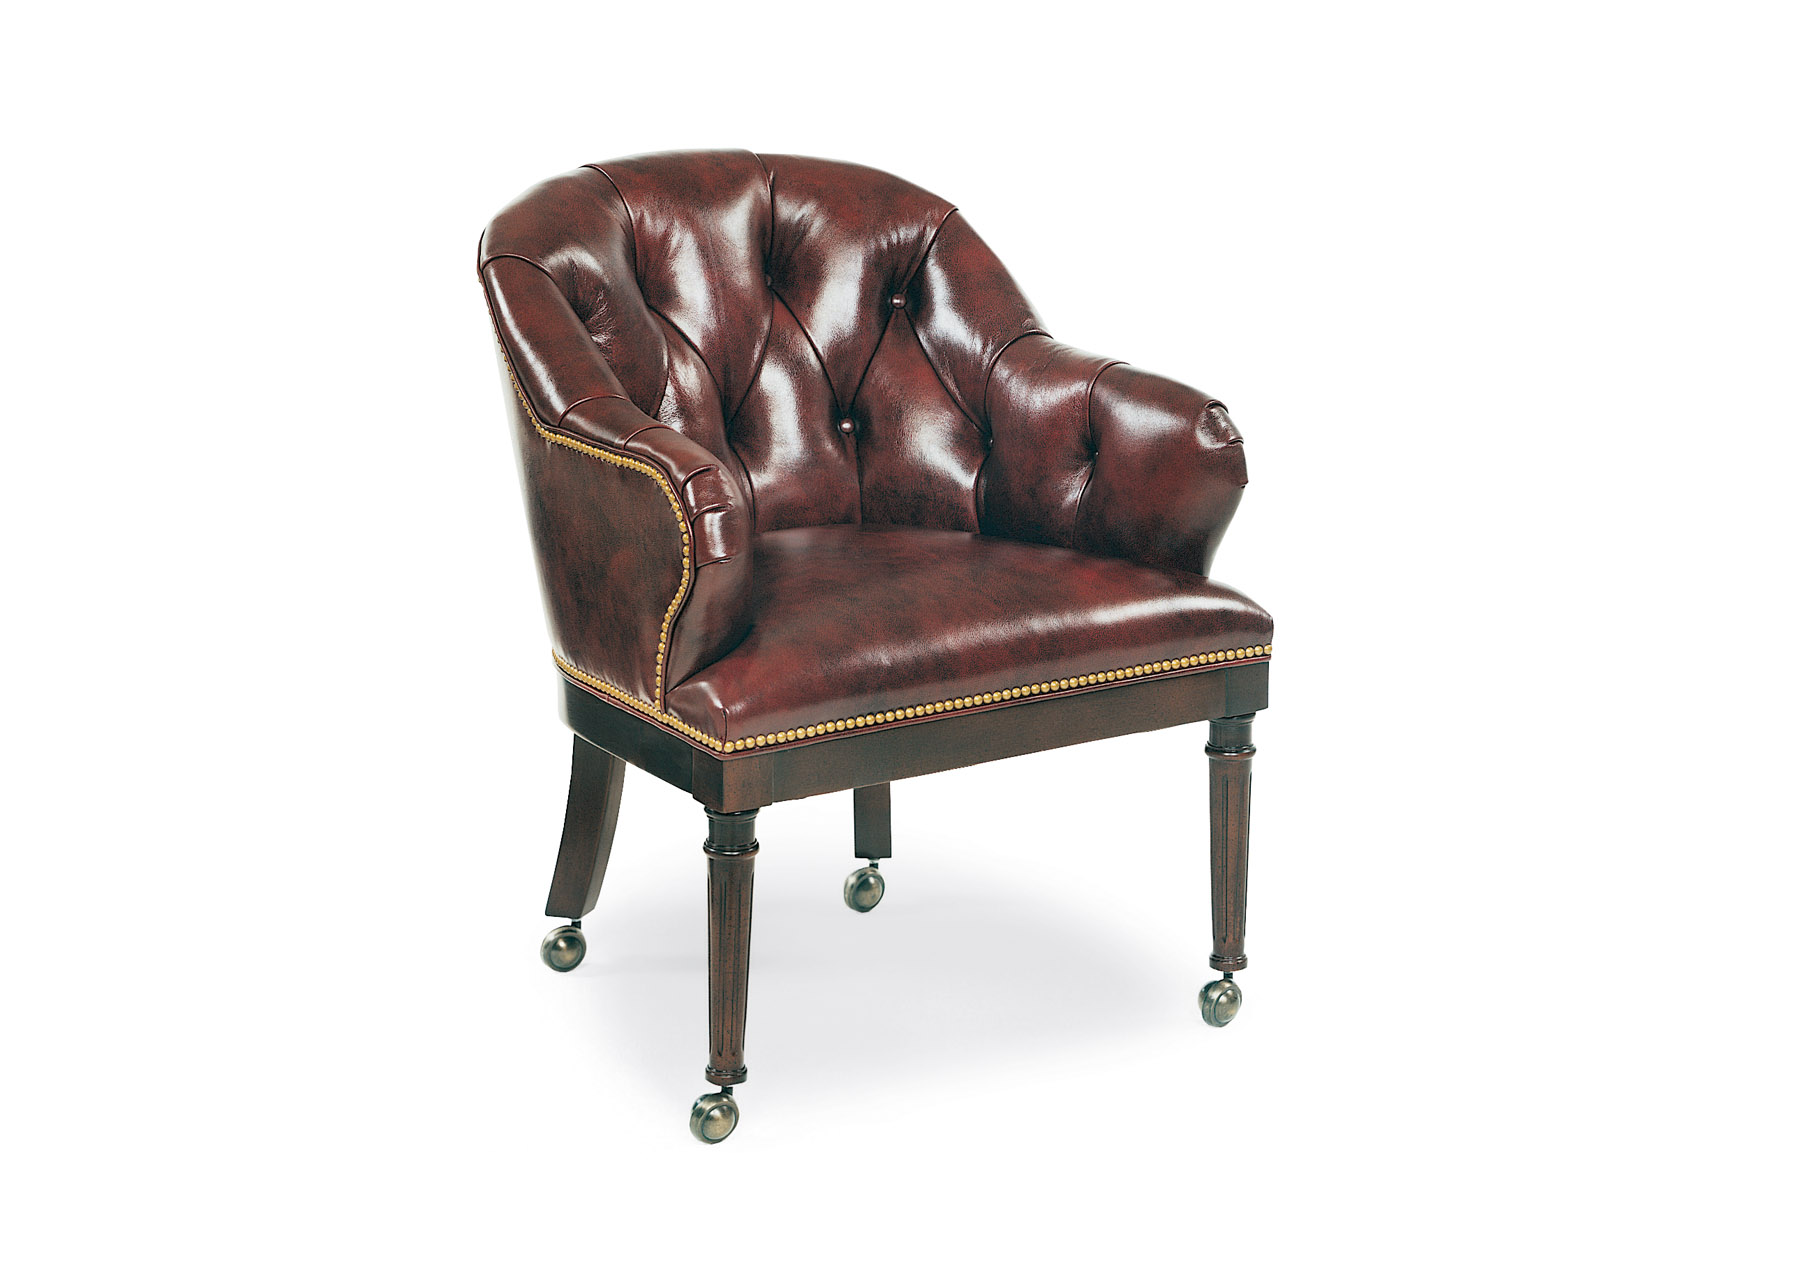 GRIGSBY TUFTED CHAIR